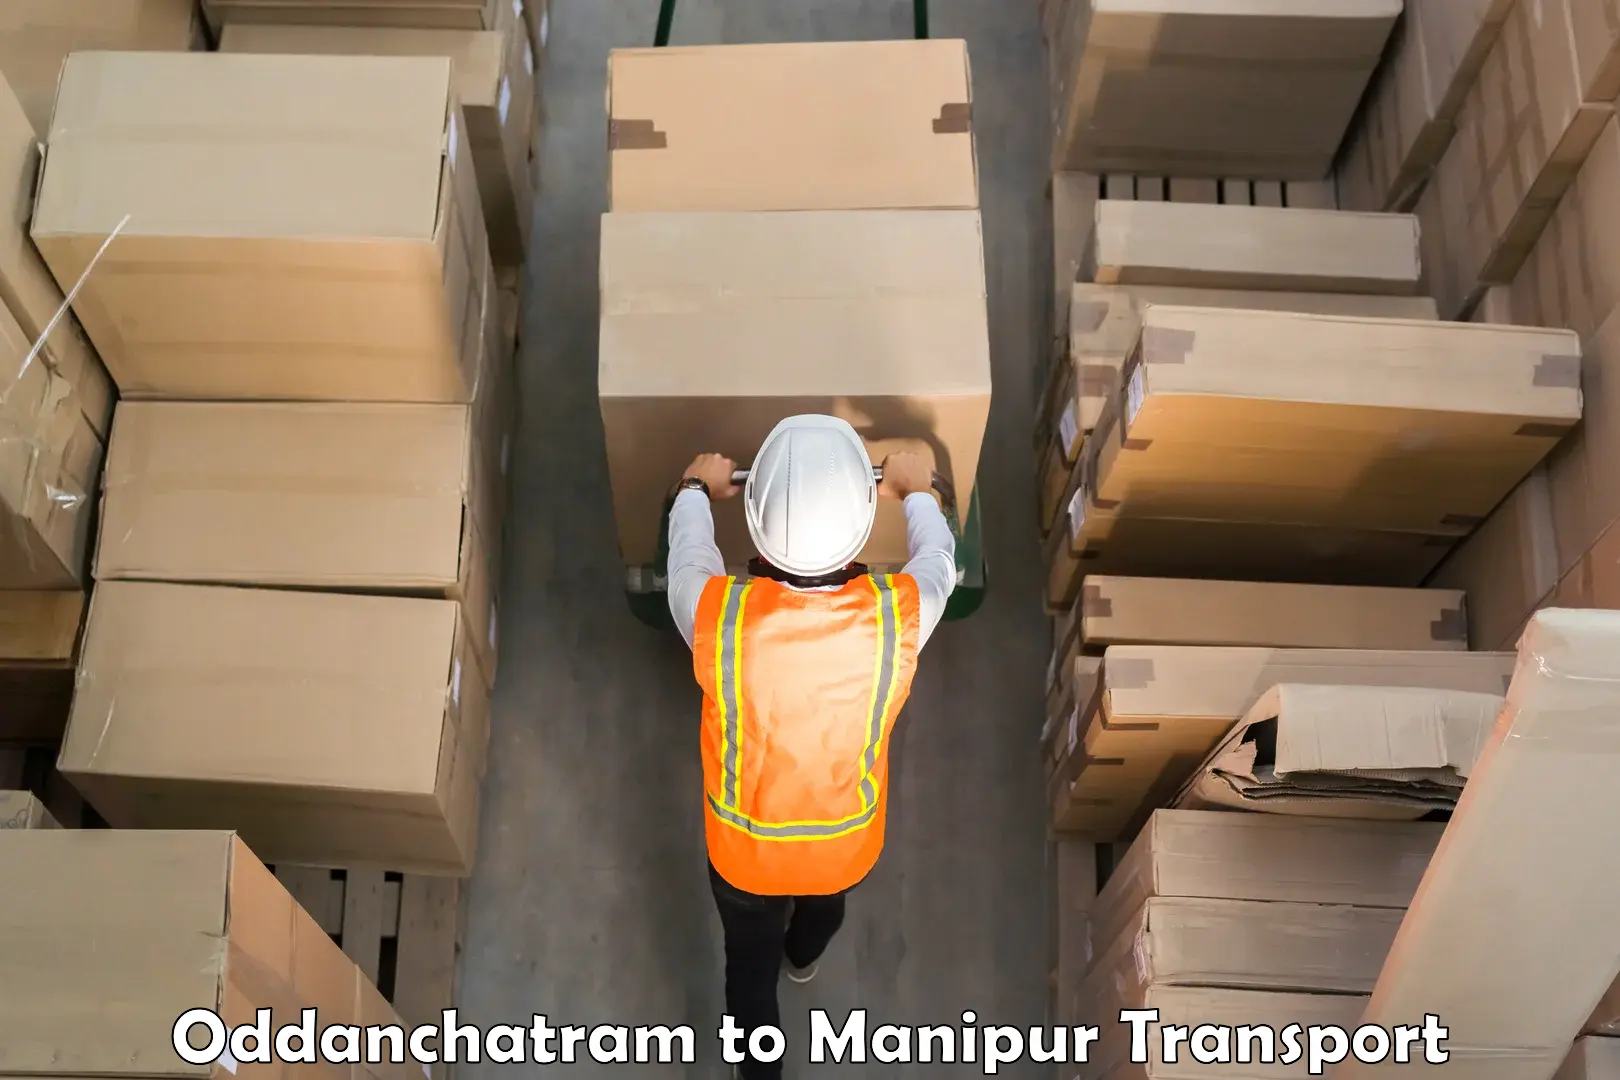 Package delivery services Oddanchatram to Chandel